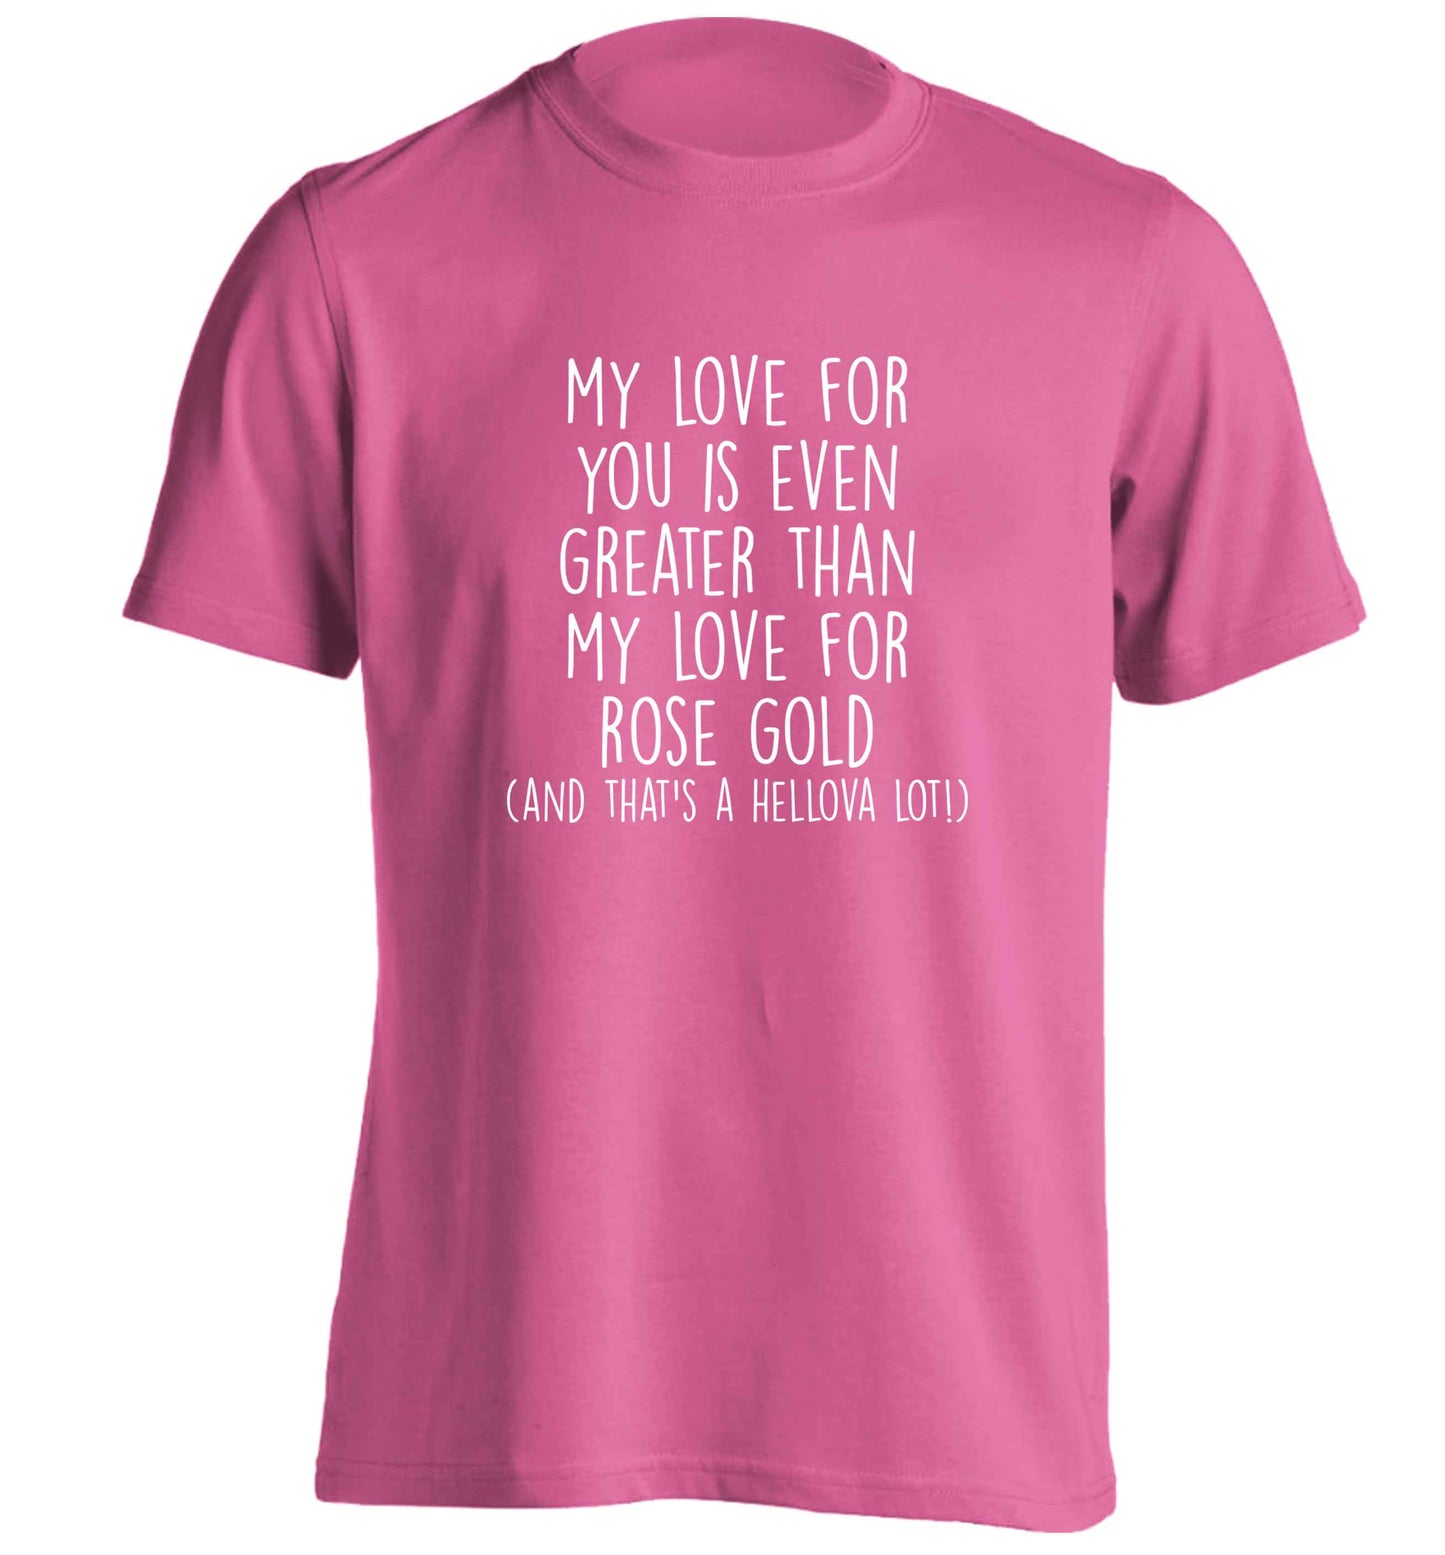 My love for you is even greater than my love for rose gold (and that's a hellova lot) adults unisex pink Tshirt 2XL